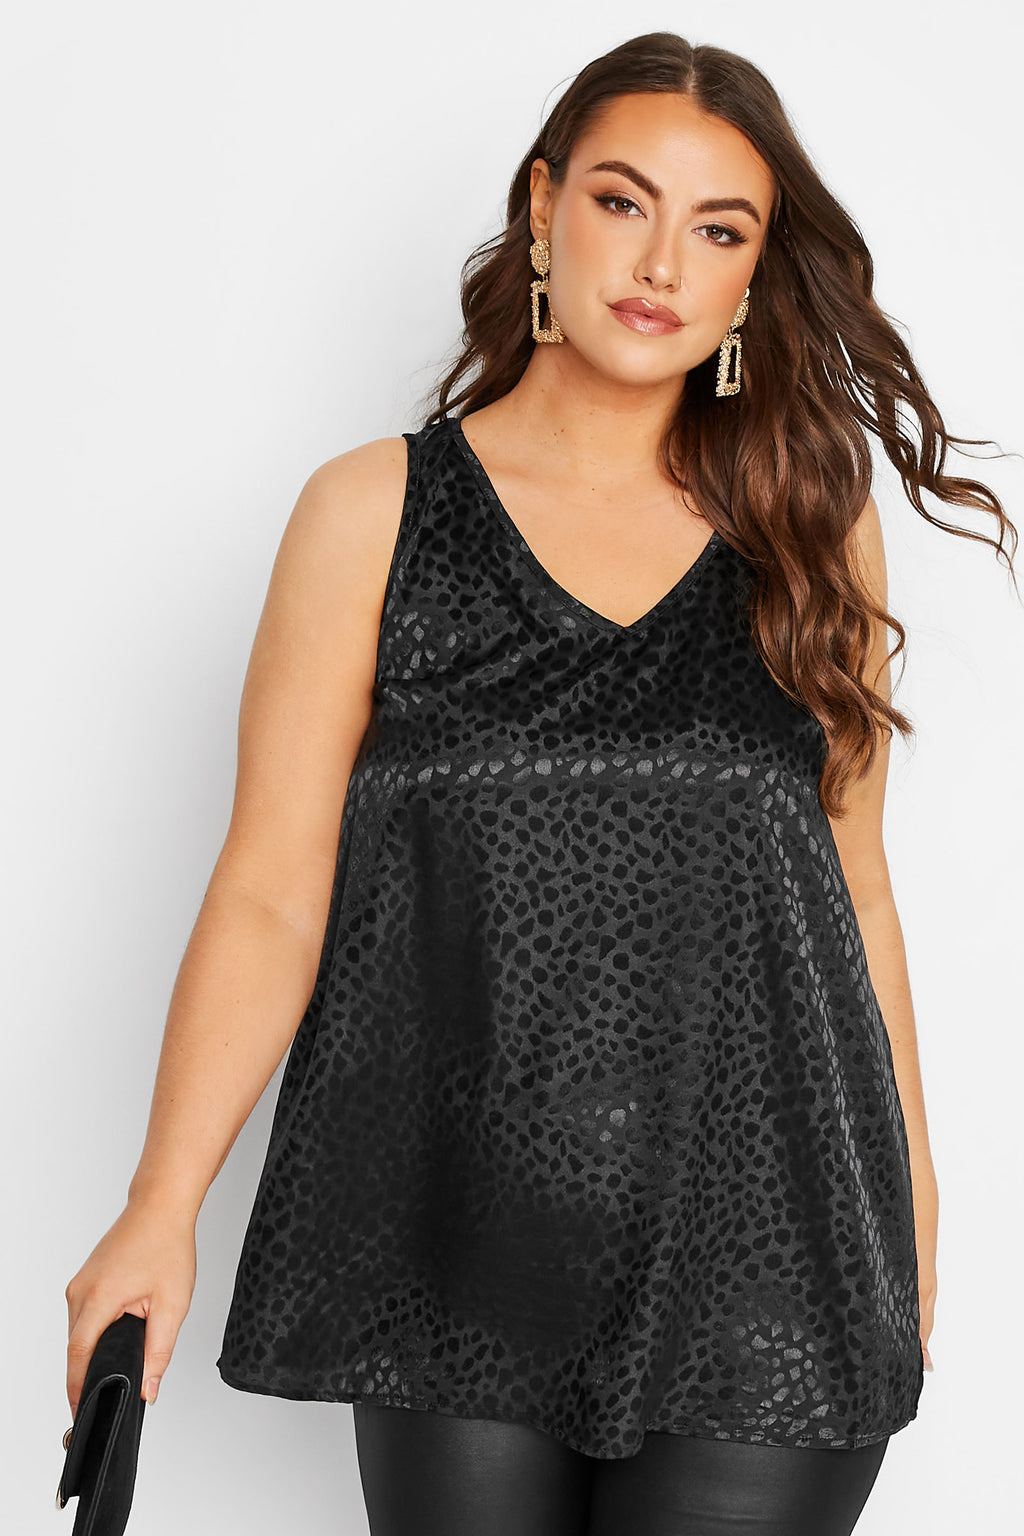 The Beach Company India - Shop beachwear for women with large bust online - Plus Size Jacquard Satin Vest Top for ladies - women's black beach outfit